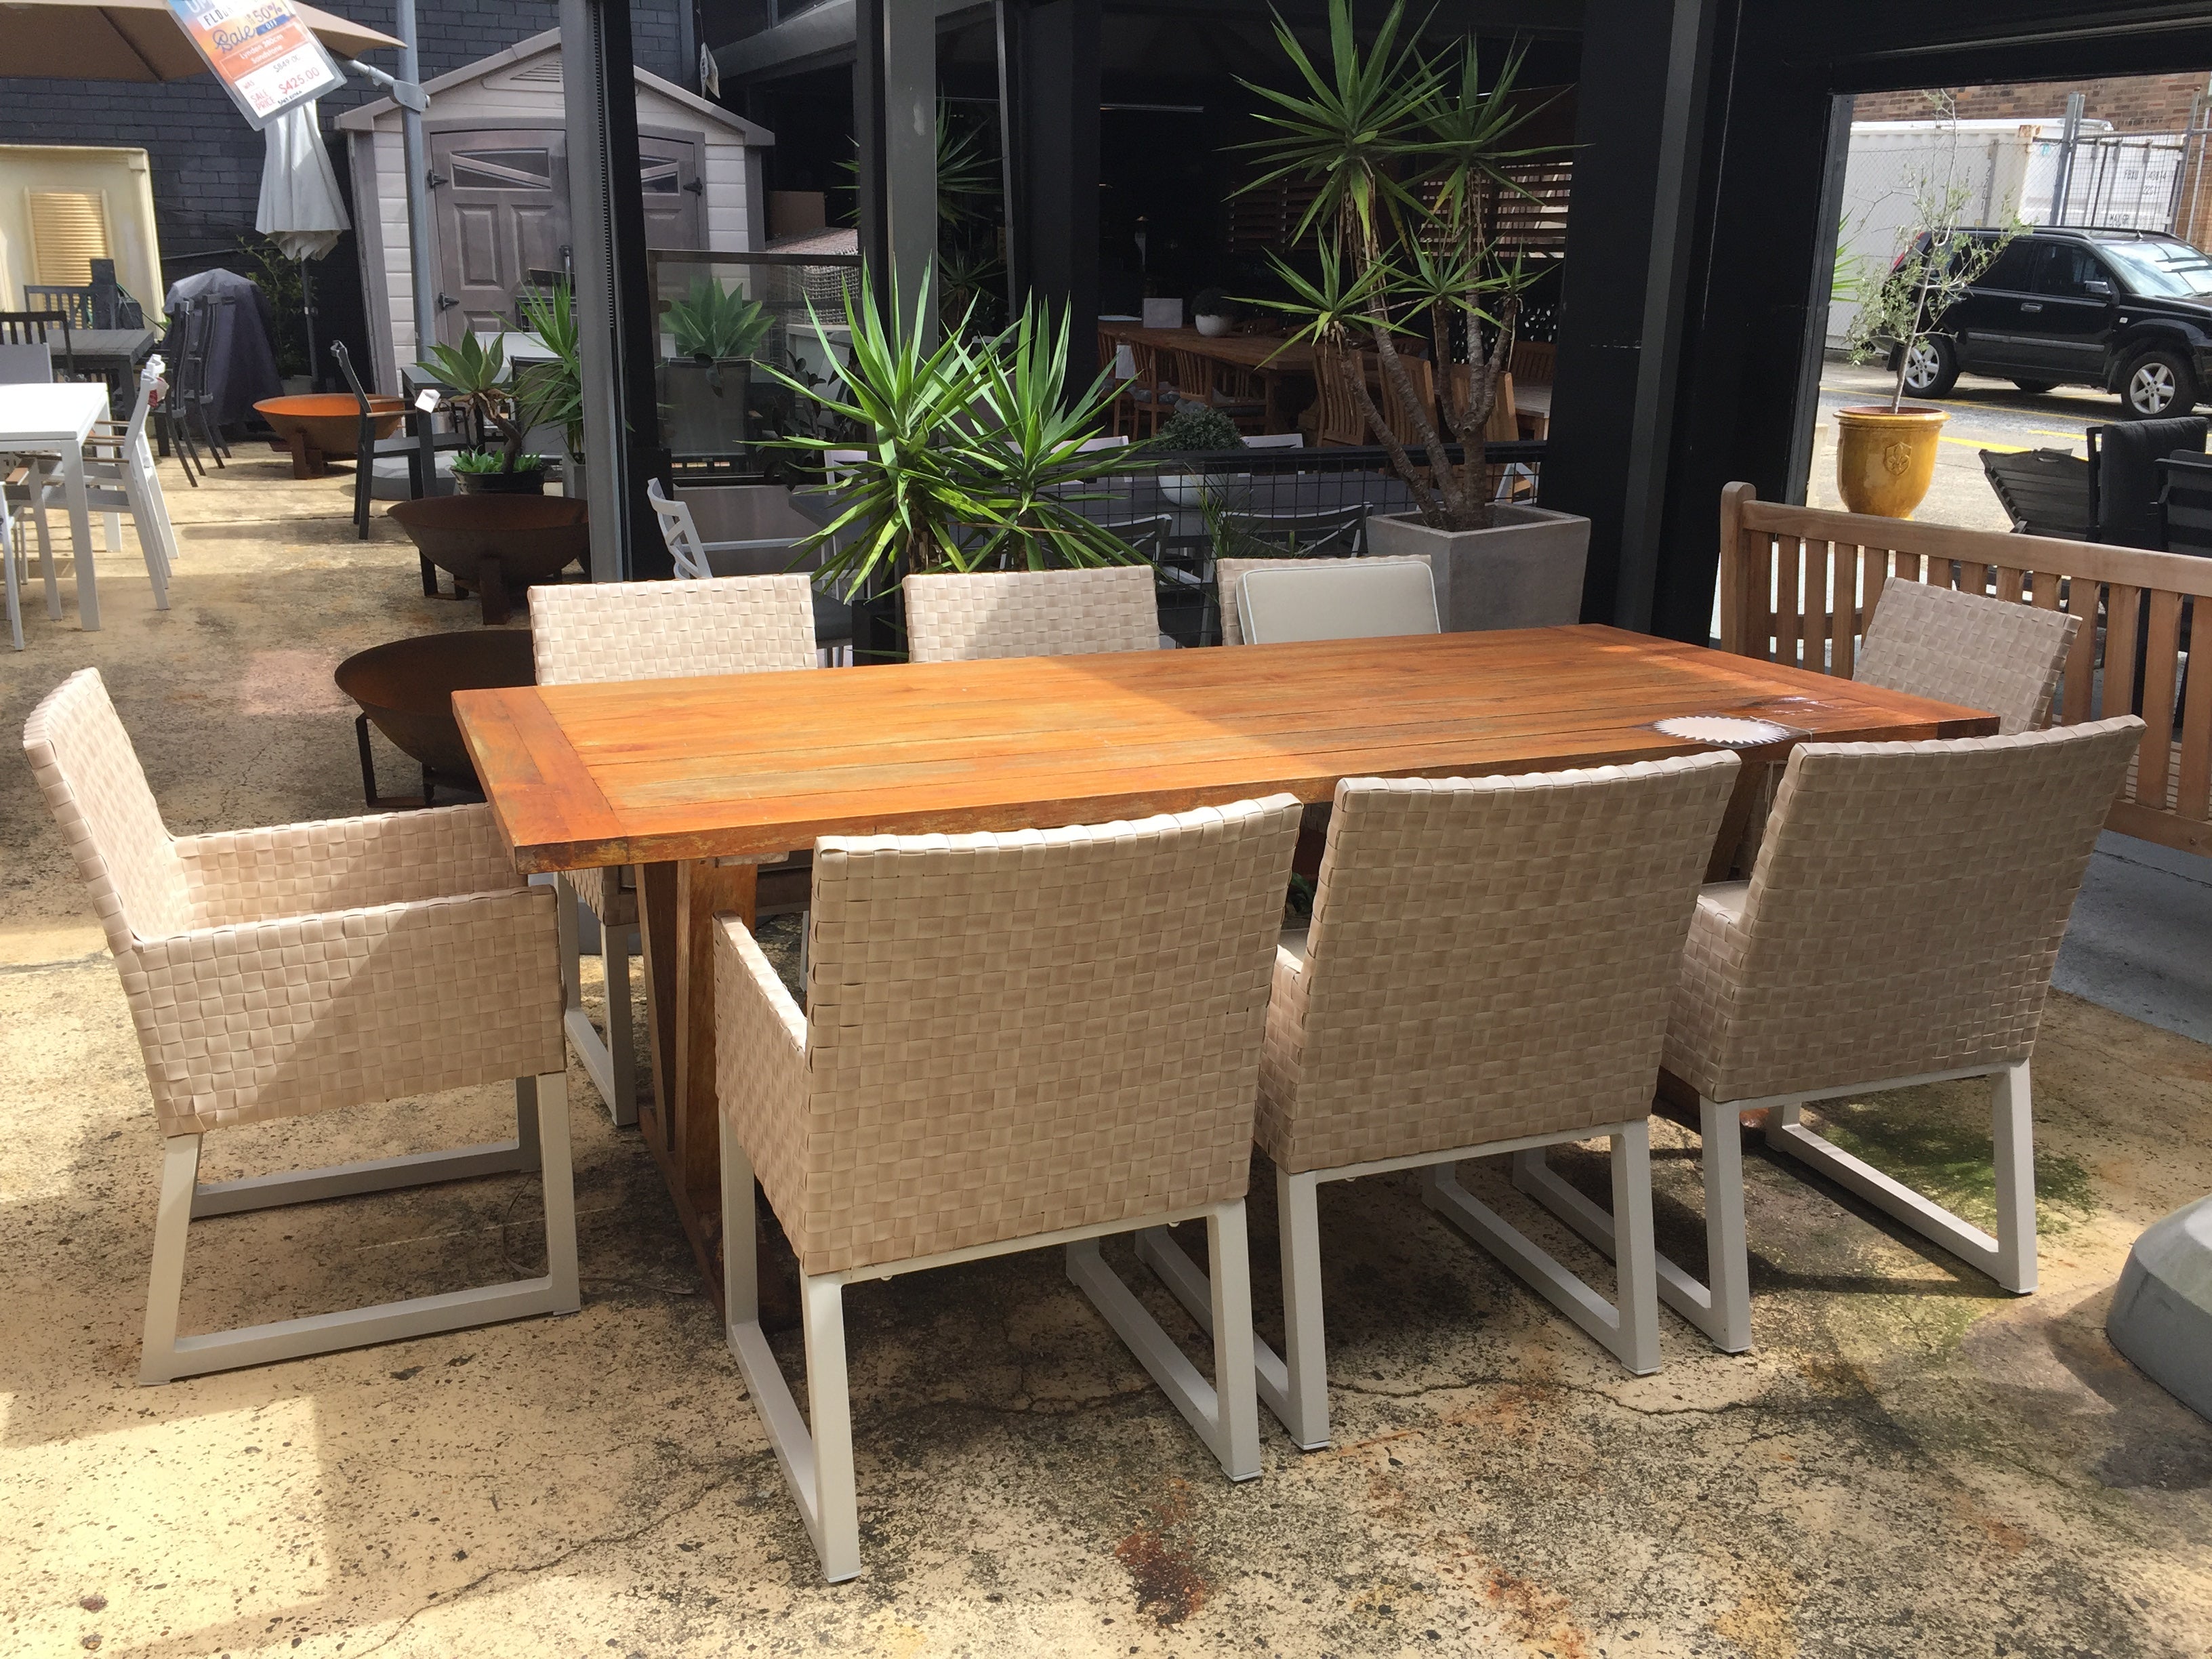 Clearance Sale - Valcor 2400mm x 110mm Teak Table with 8 Milan Chairs